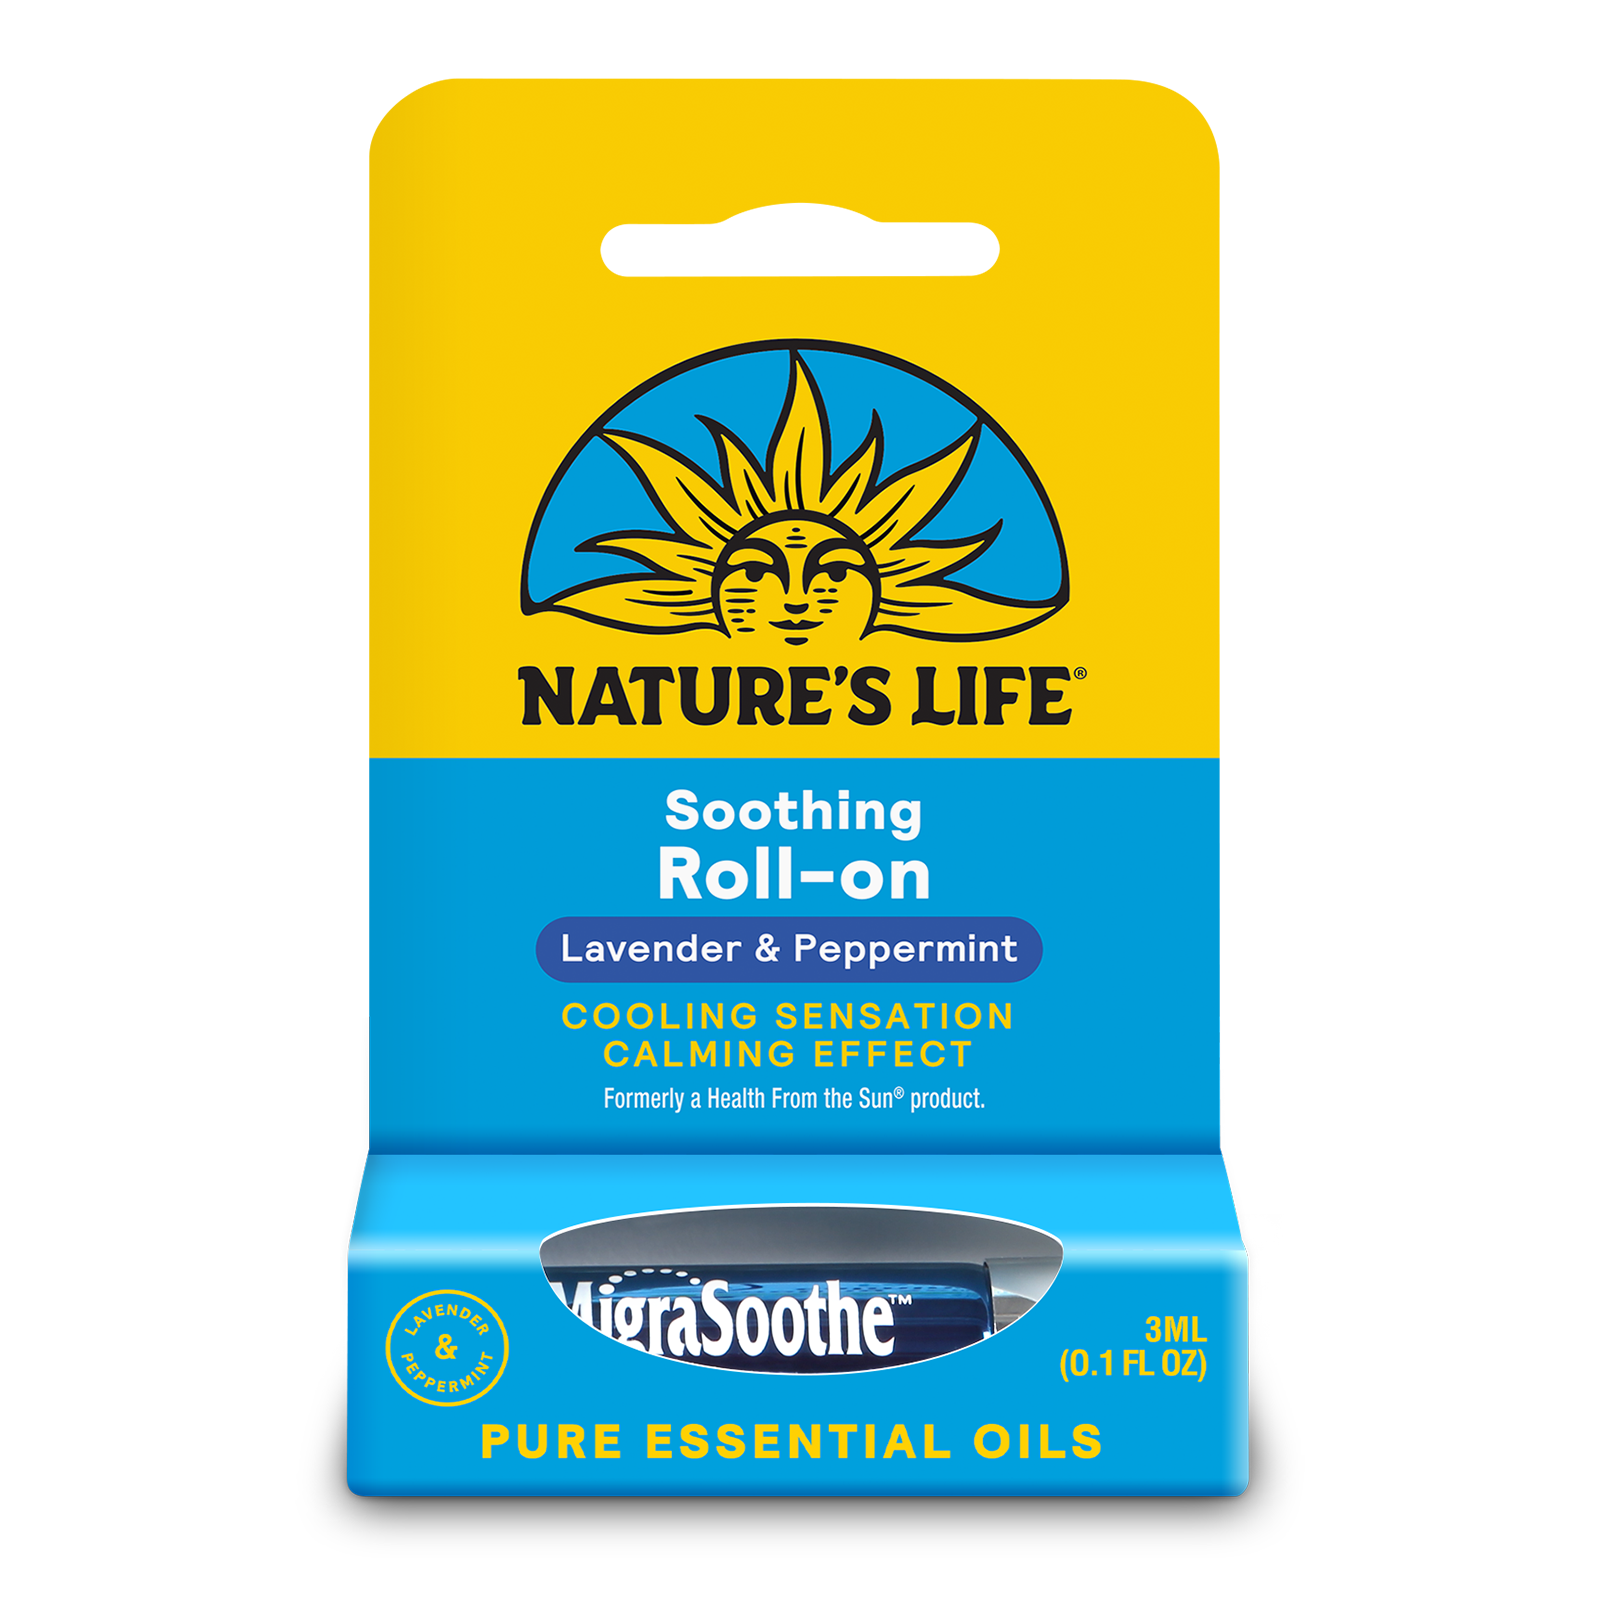 Nature's Life MigraSoothe | Cool & Refreshing Effect| Essential Oil Roll-On Stick Featuring a Blend of Peppermint & Lavender Oils - image 1 of 6